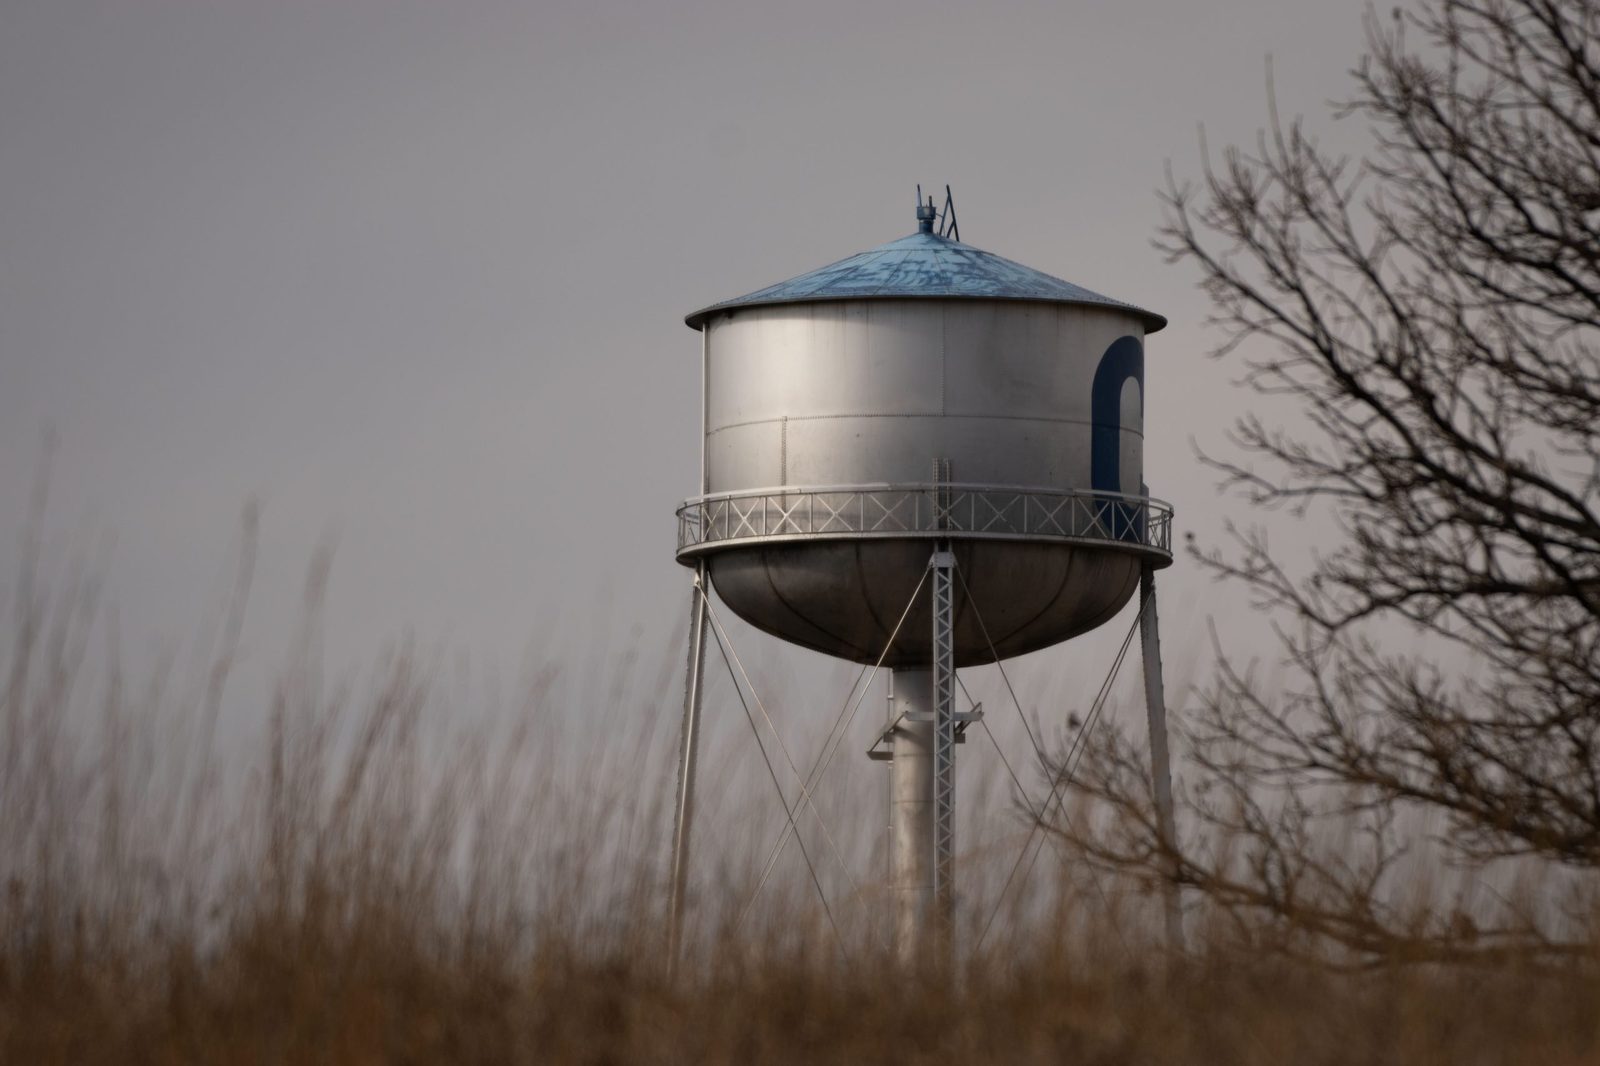 Let me just say, if it weren't for our water tower, I would definitely be lost wandering the upper arb and starting a new life living in the woods!